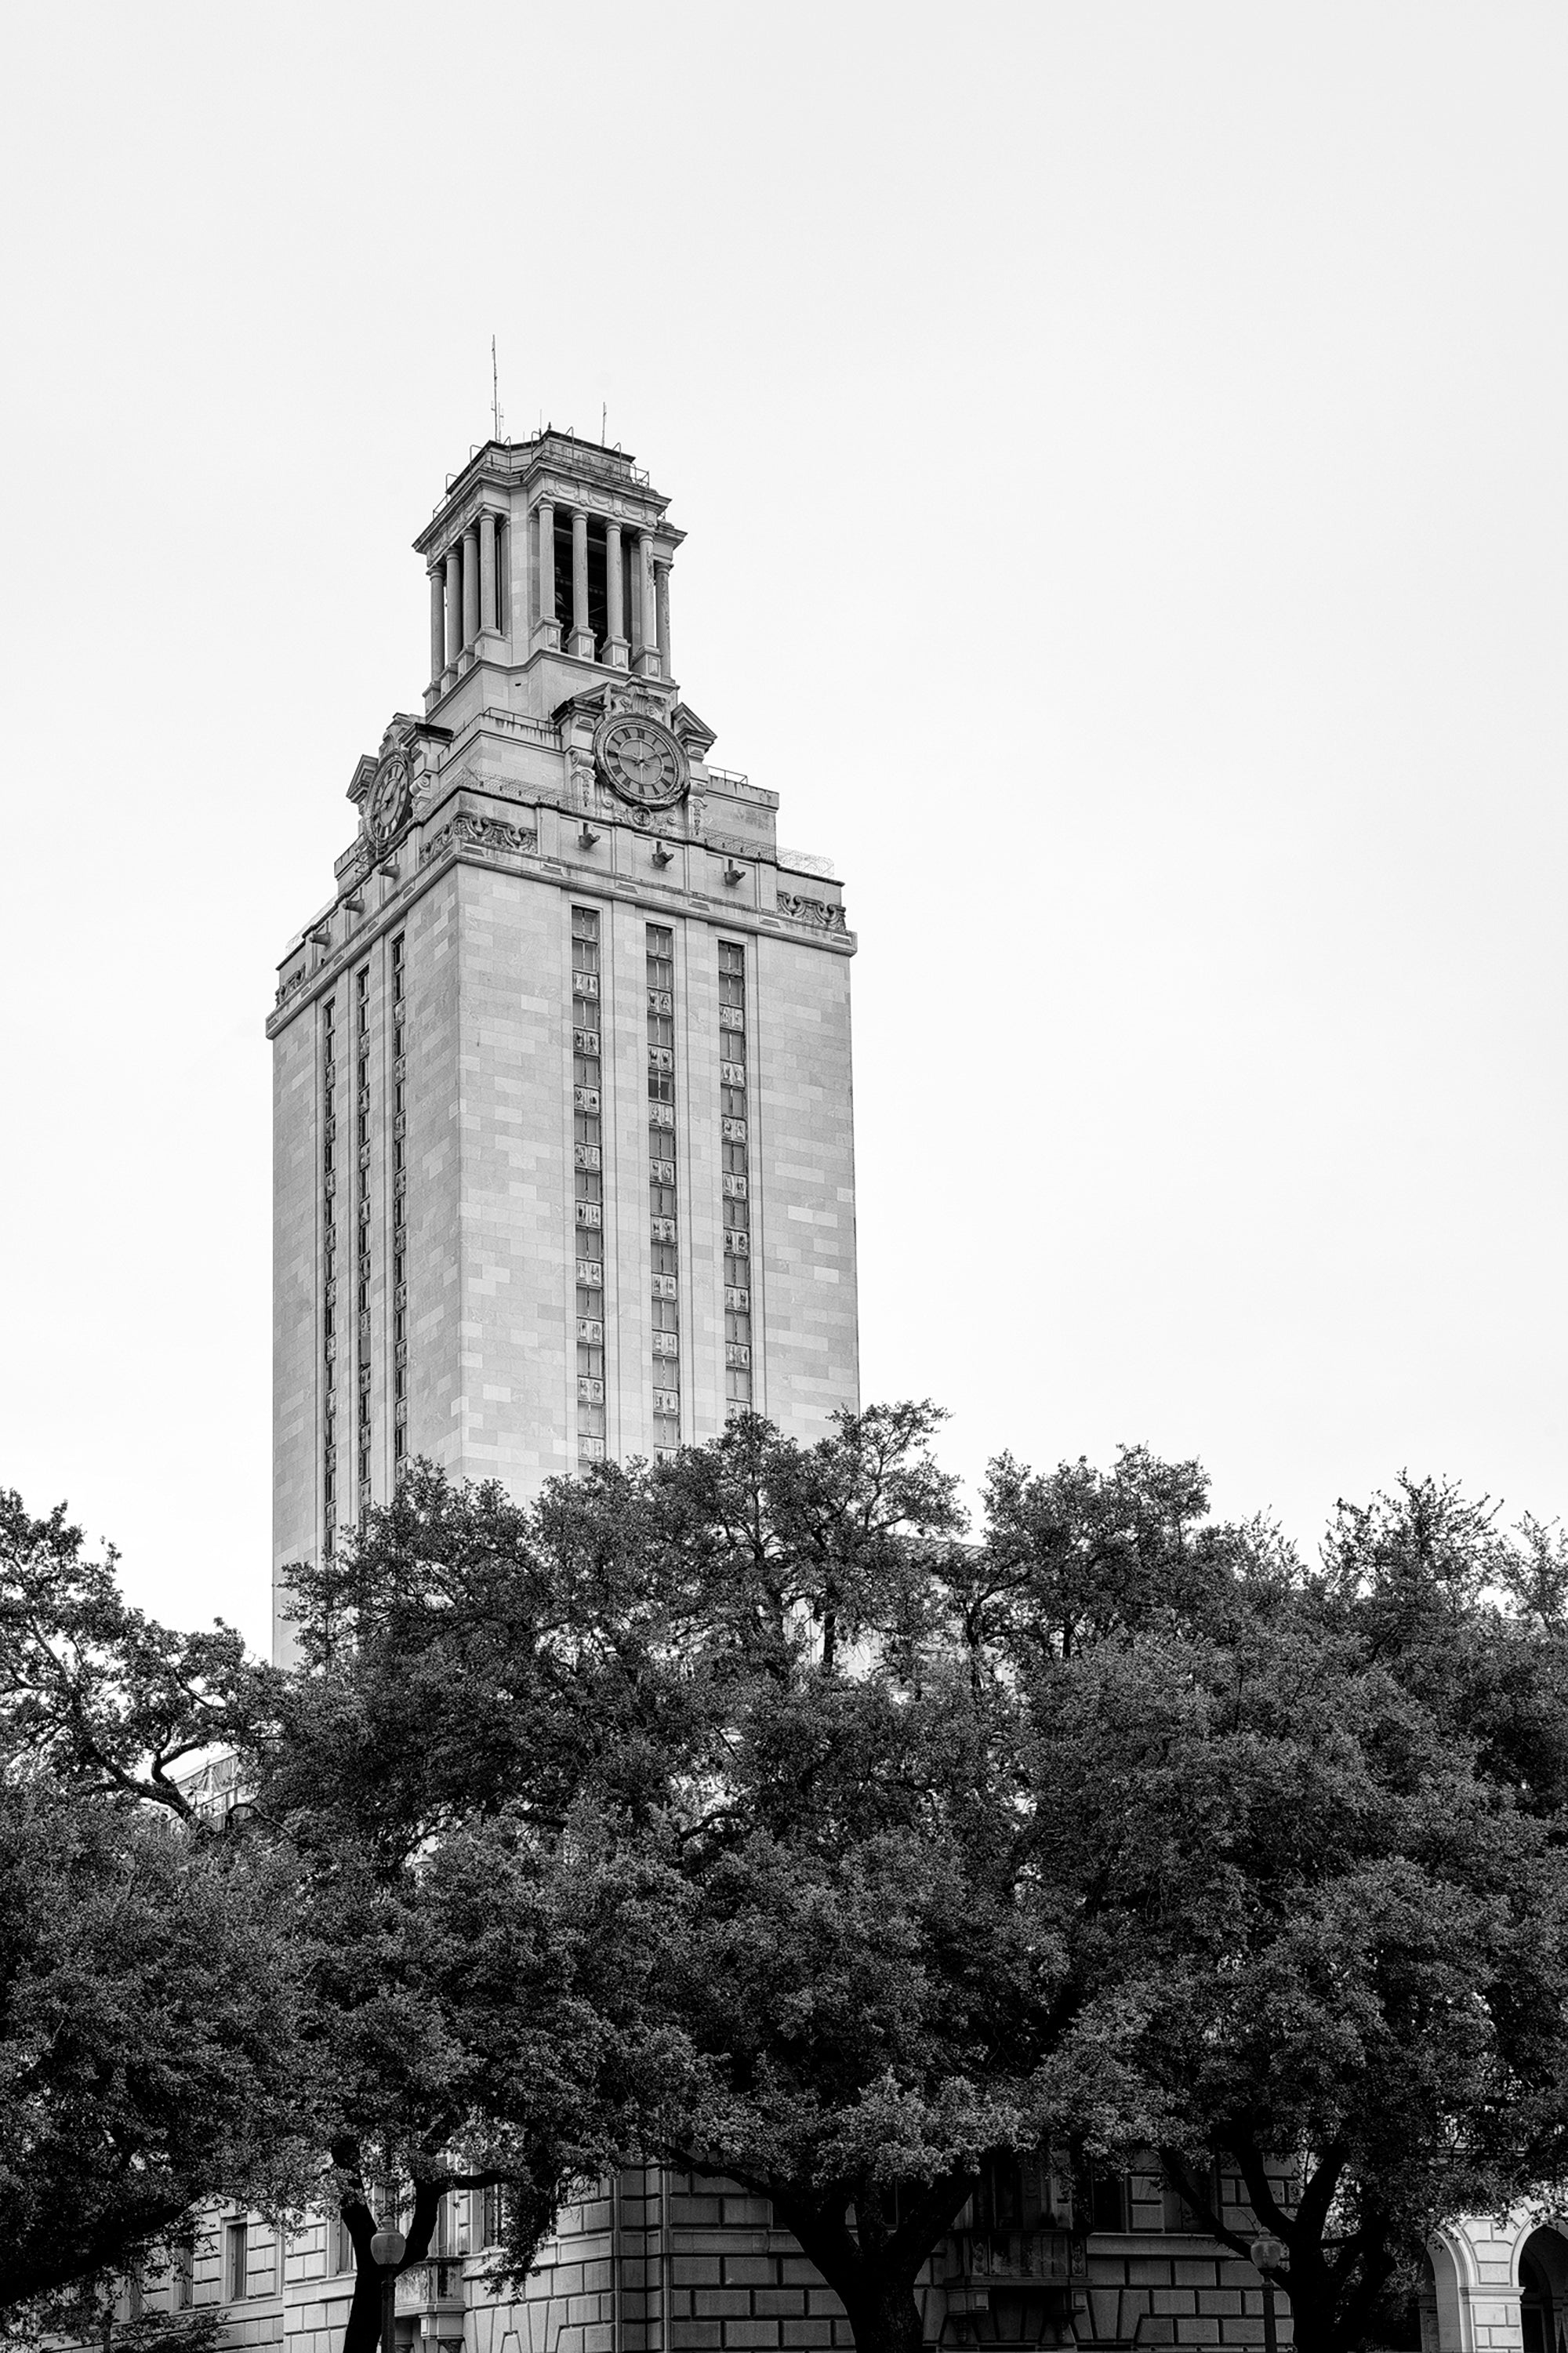 Trees Around the Base of the Tower at UT Austin - Black and White Photograph by Keith Dotson. Buy a fine art print.